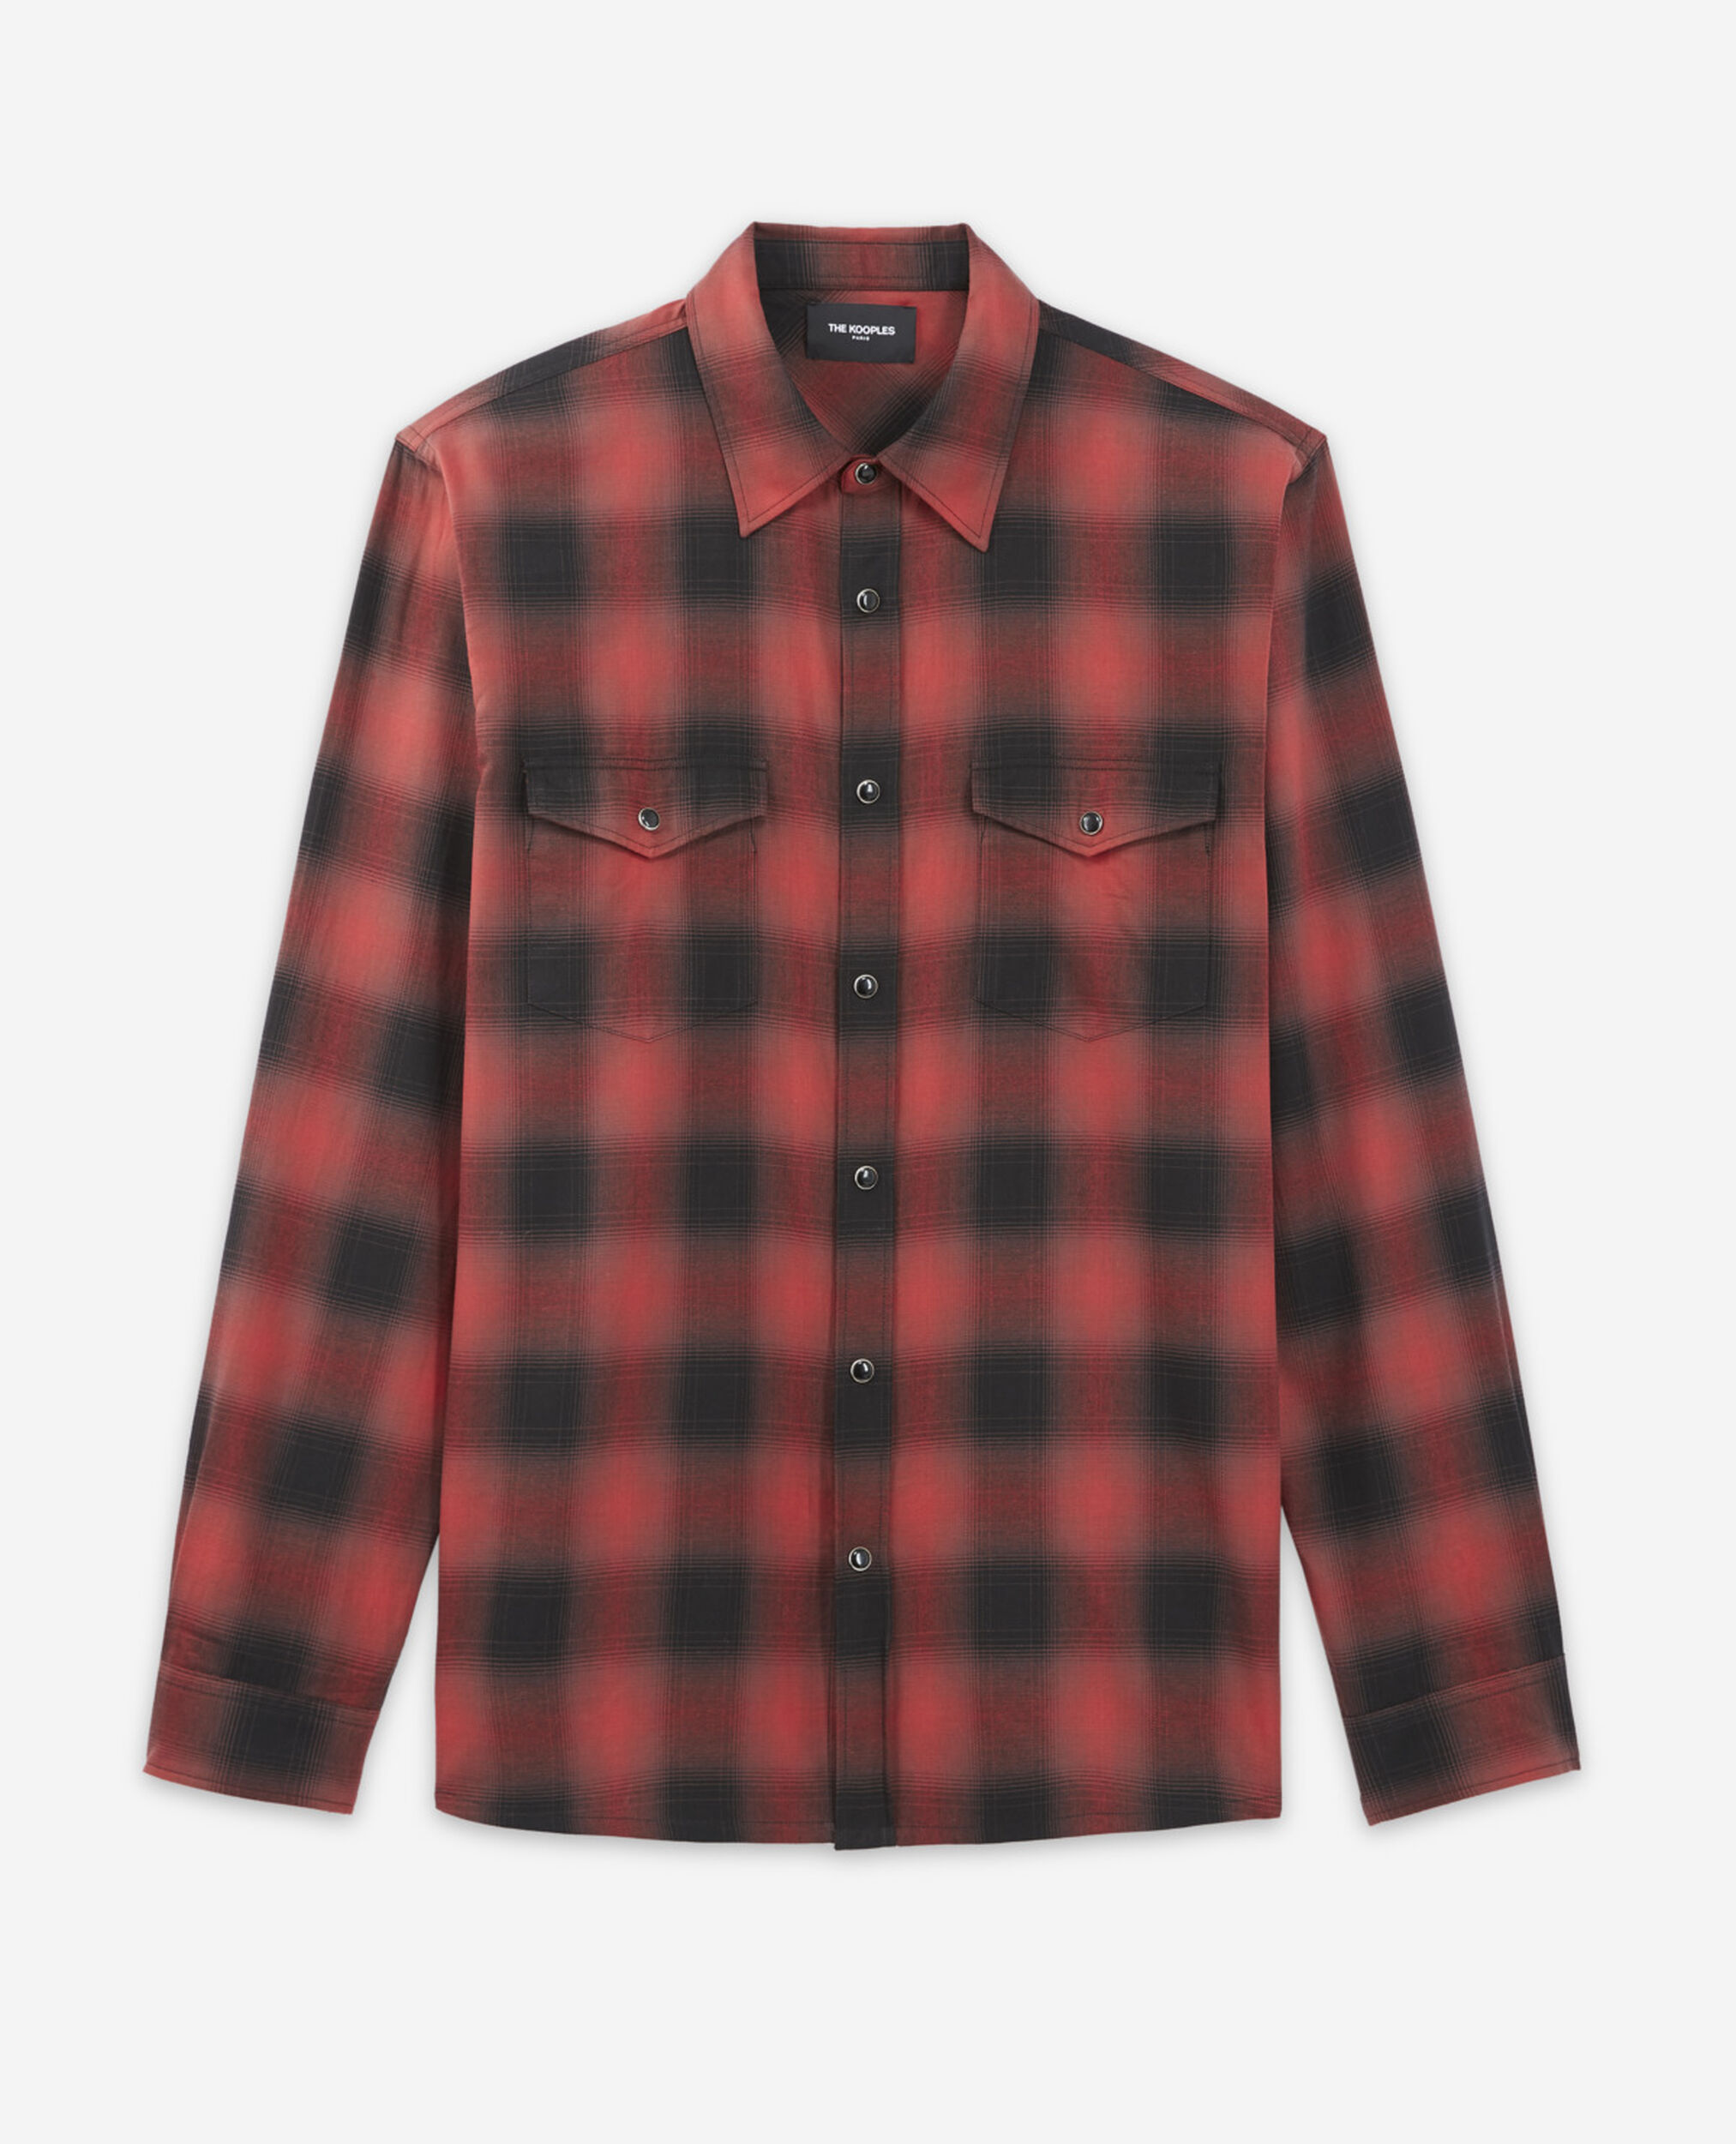 Black and red cotton shirt with check motif, RED / BLACK, hi-res image number null